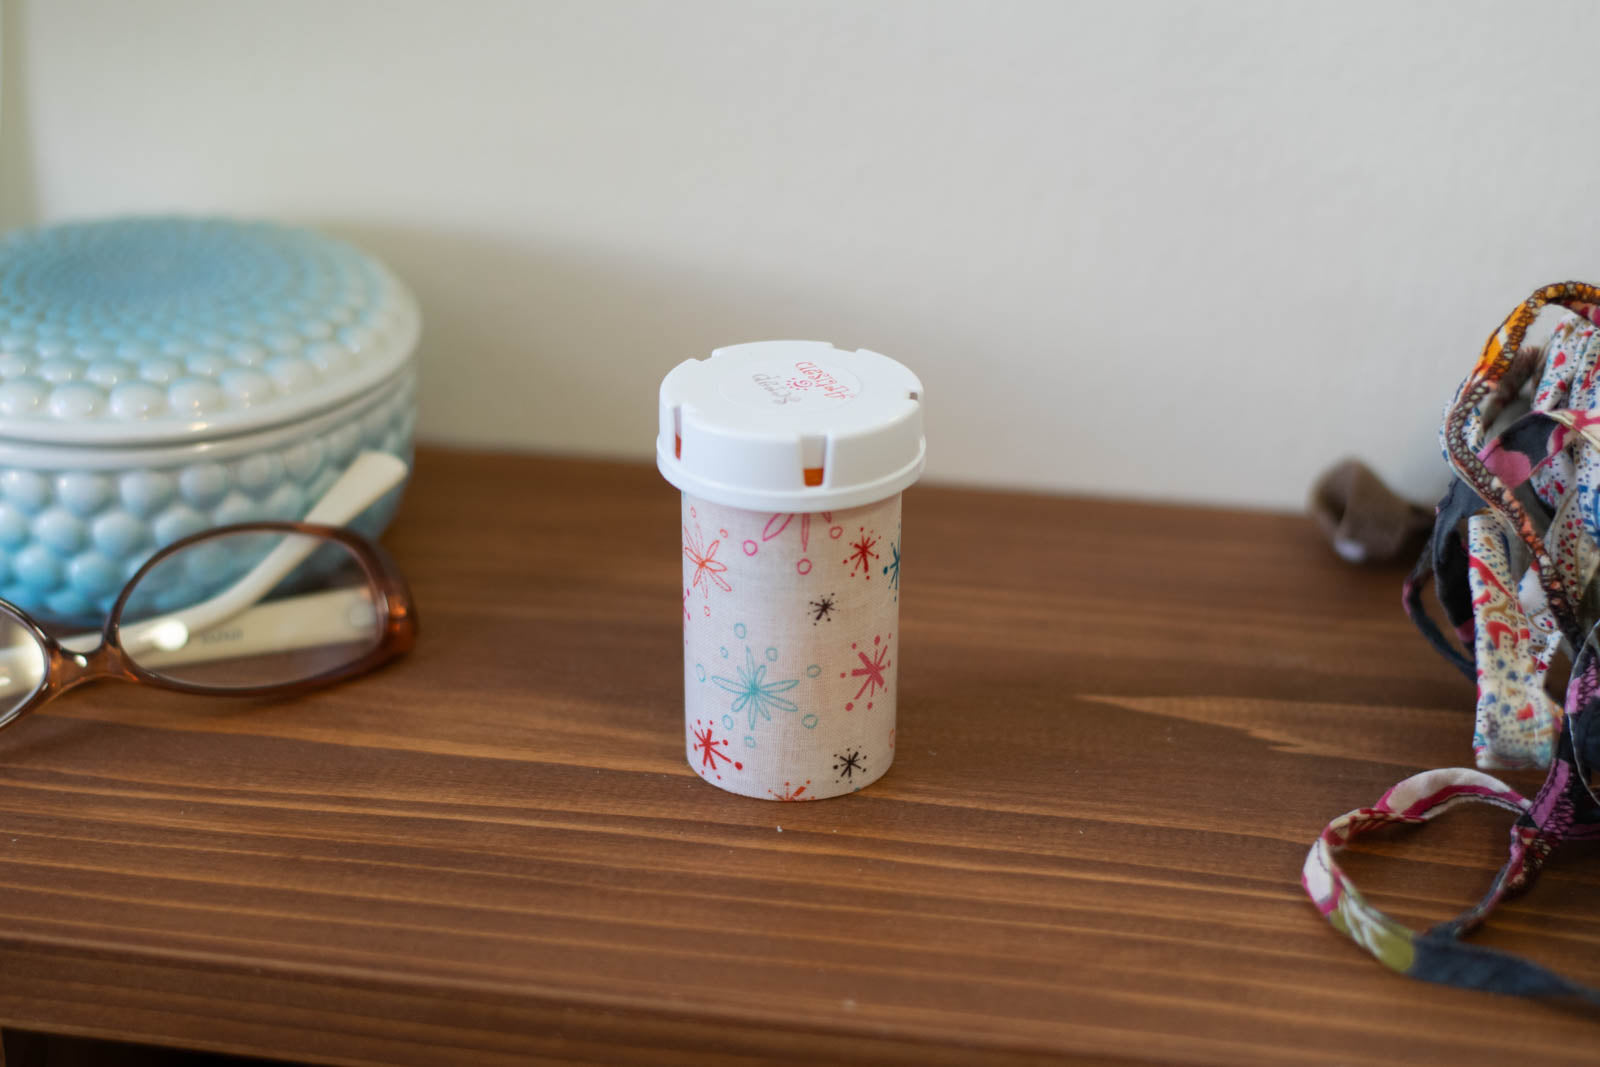 upcycled prescription bottle sewing kit — multi color sparkles on white, 3" high, closed